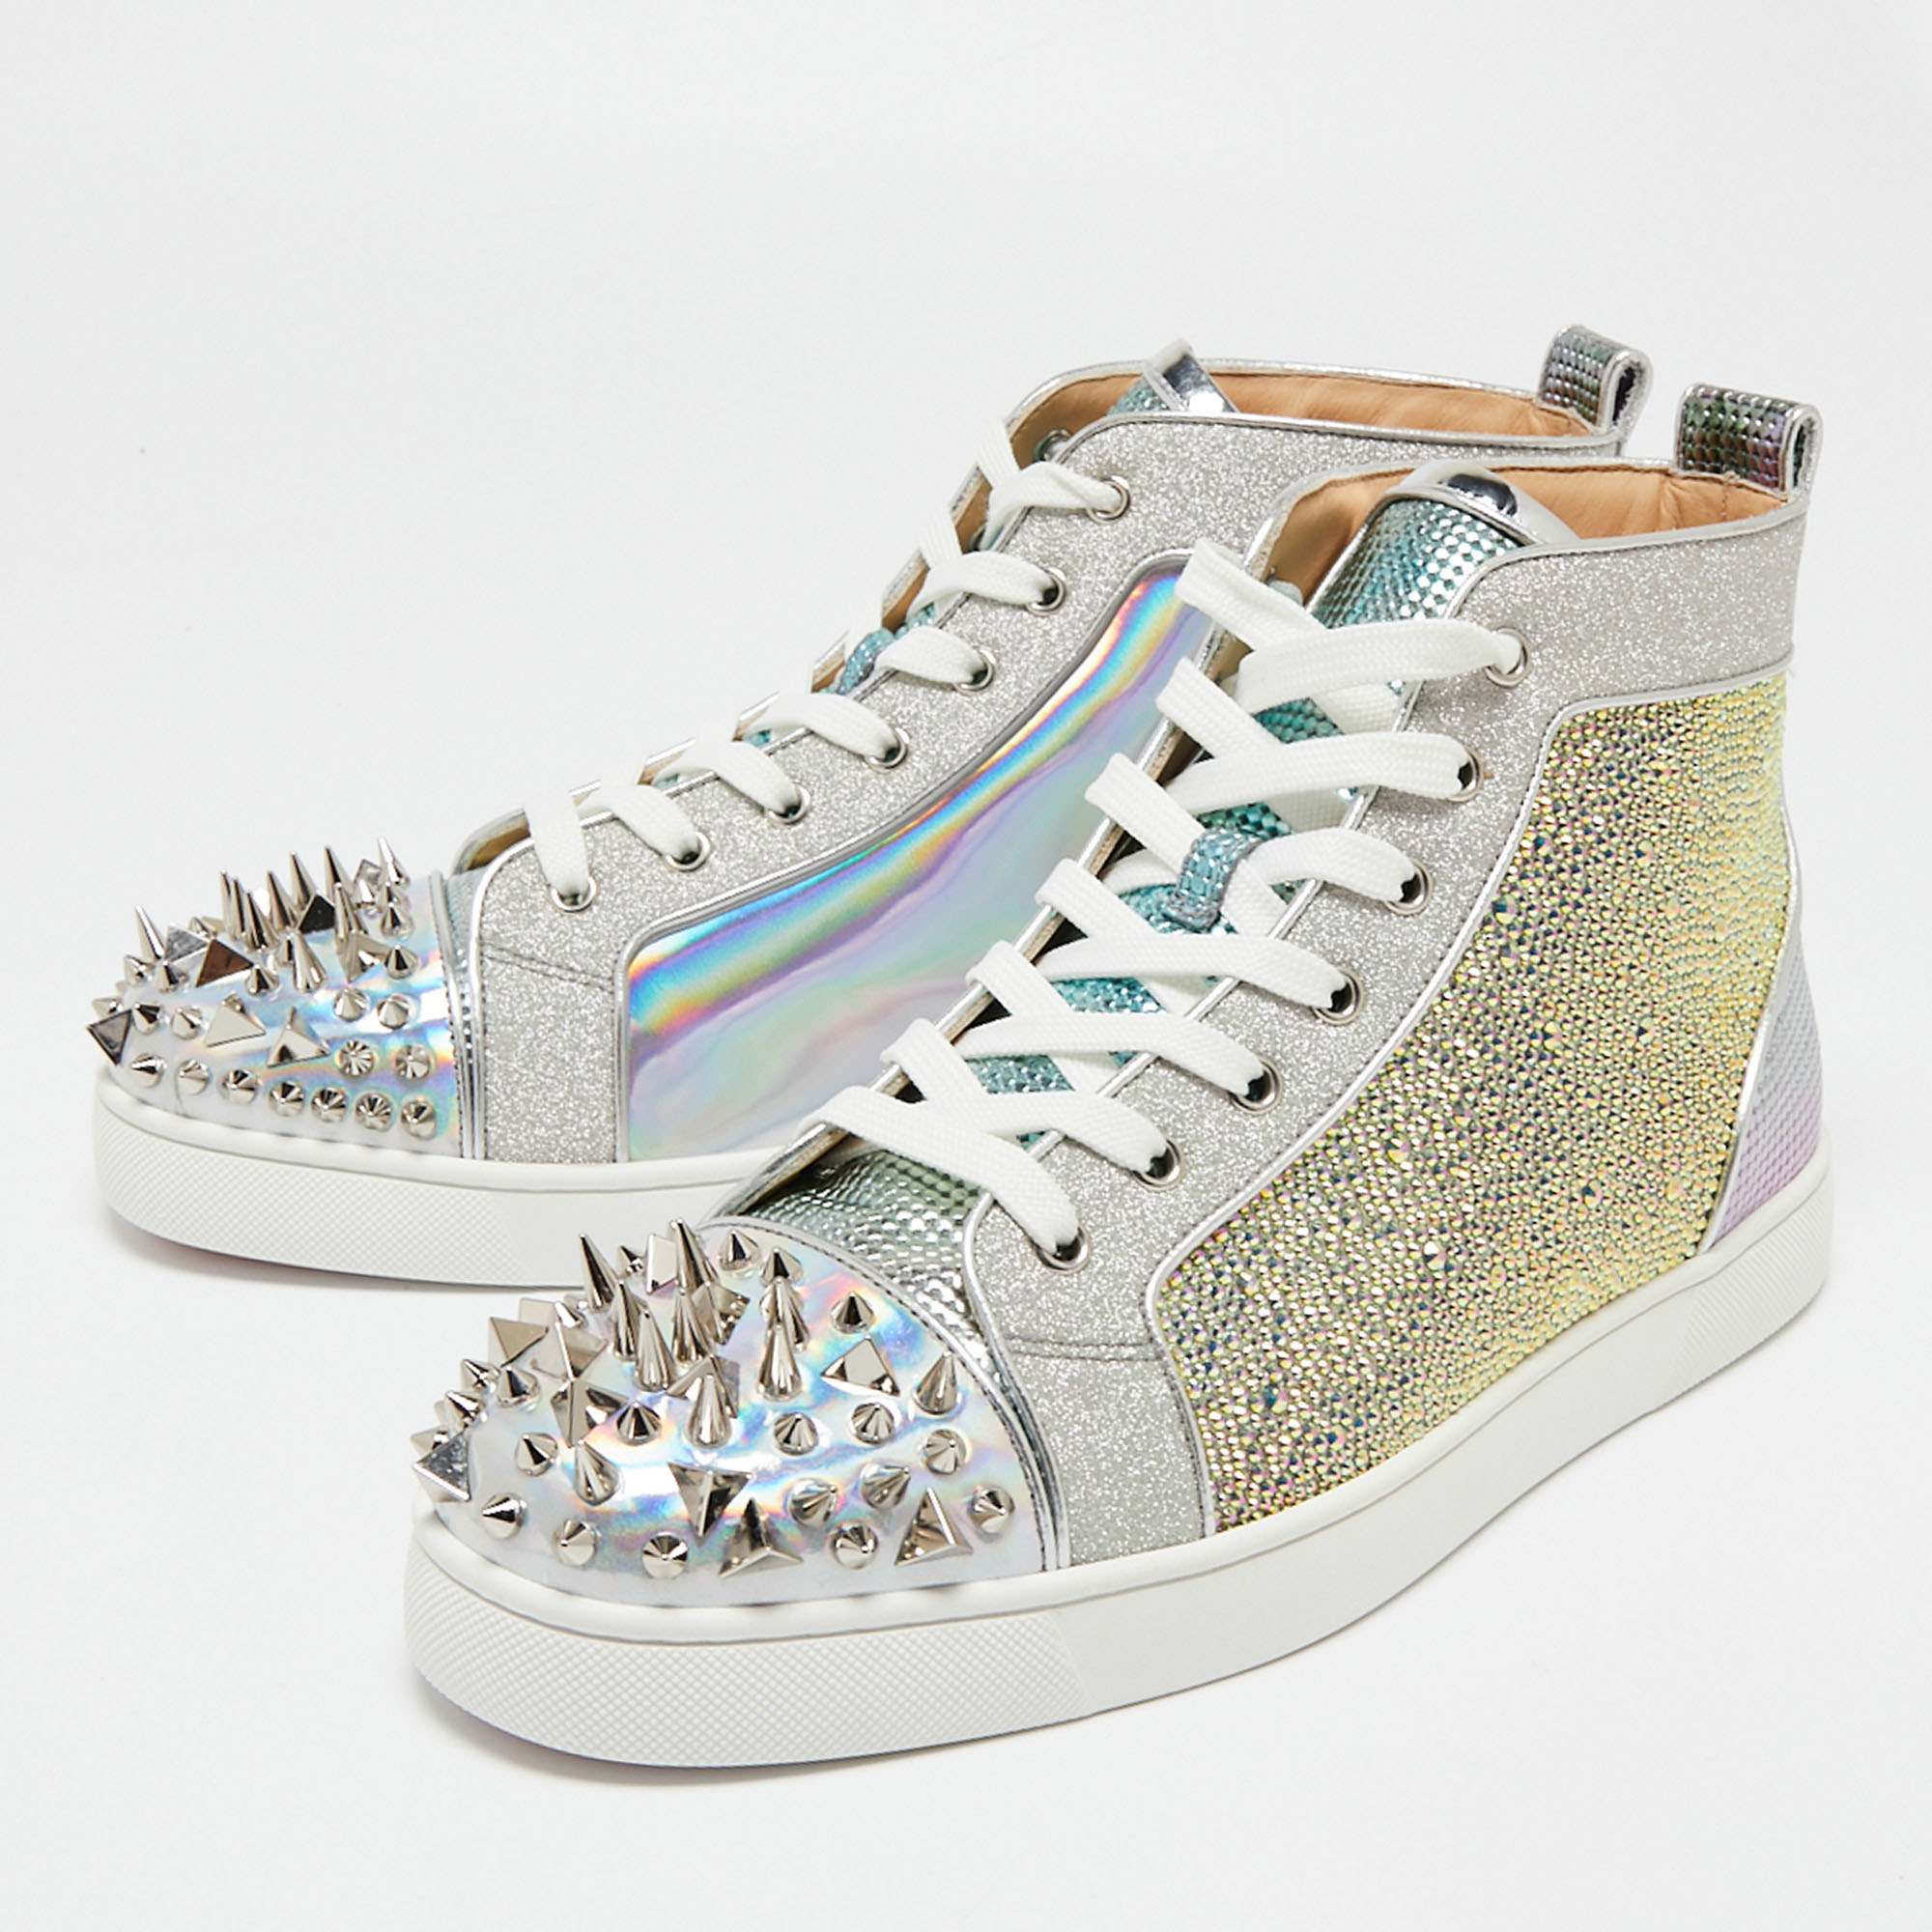 

Christian Louboutin Silver Glitter, Iridescent and Crystal Embellished Leather Lou Spikes High-Top Sneakers Size